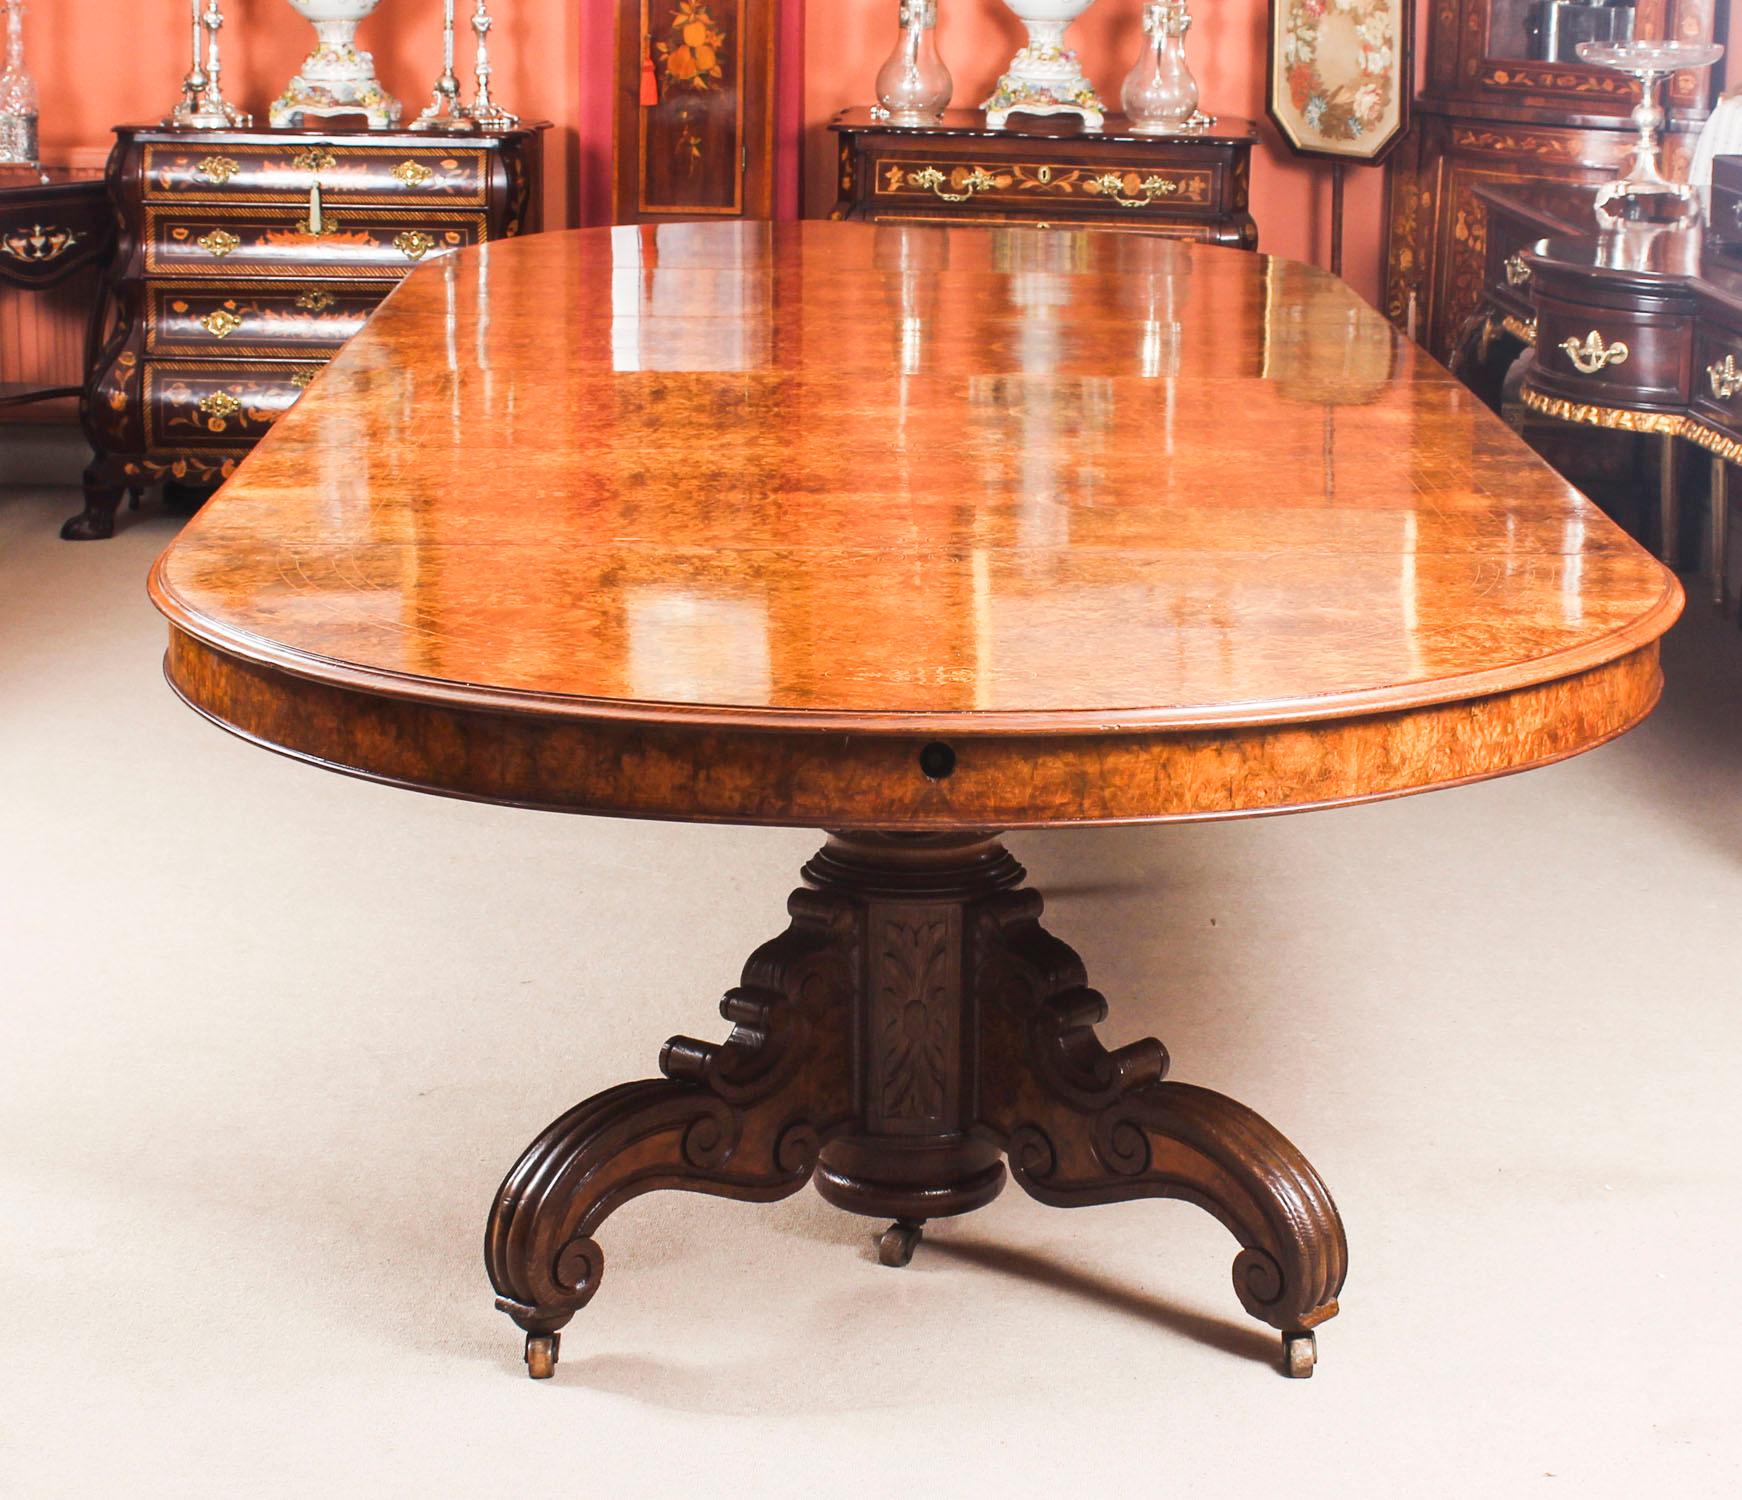 This is a magnificent antique Victorian split base burr walnut dining table circa 1880 in date.

It has been hand crafted from burr walnut, and the beautiful top has been masterfullt inlaid with wonderful marquetry decoration.

The four leaves